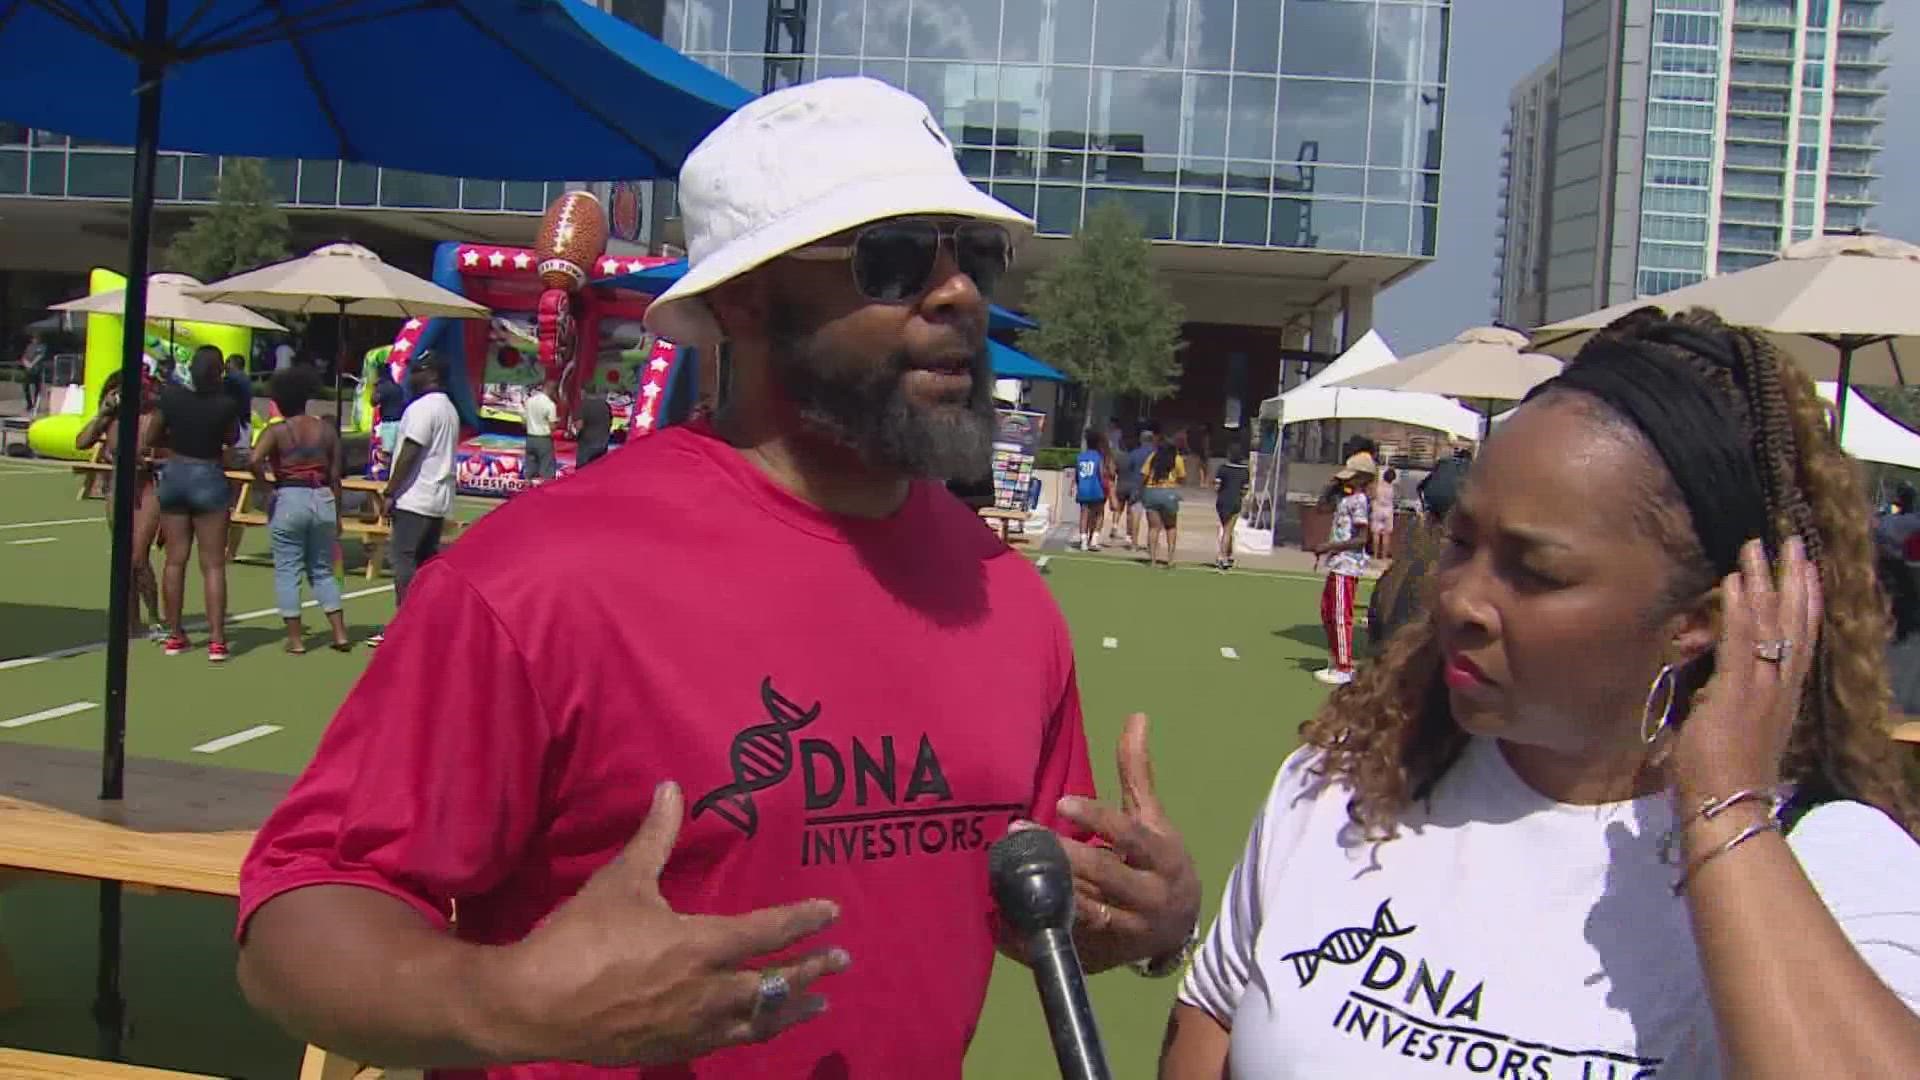 North Texans celebrating Juneteenth talked about unity and making the world a better place.